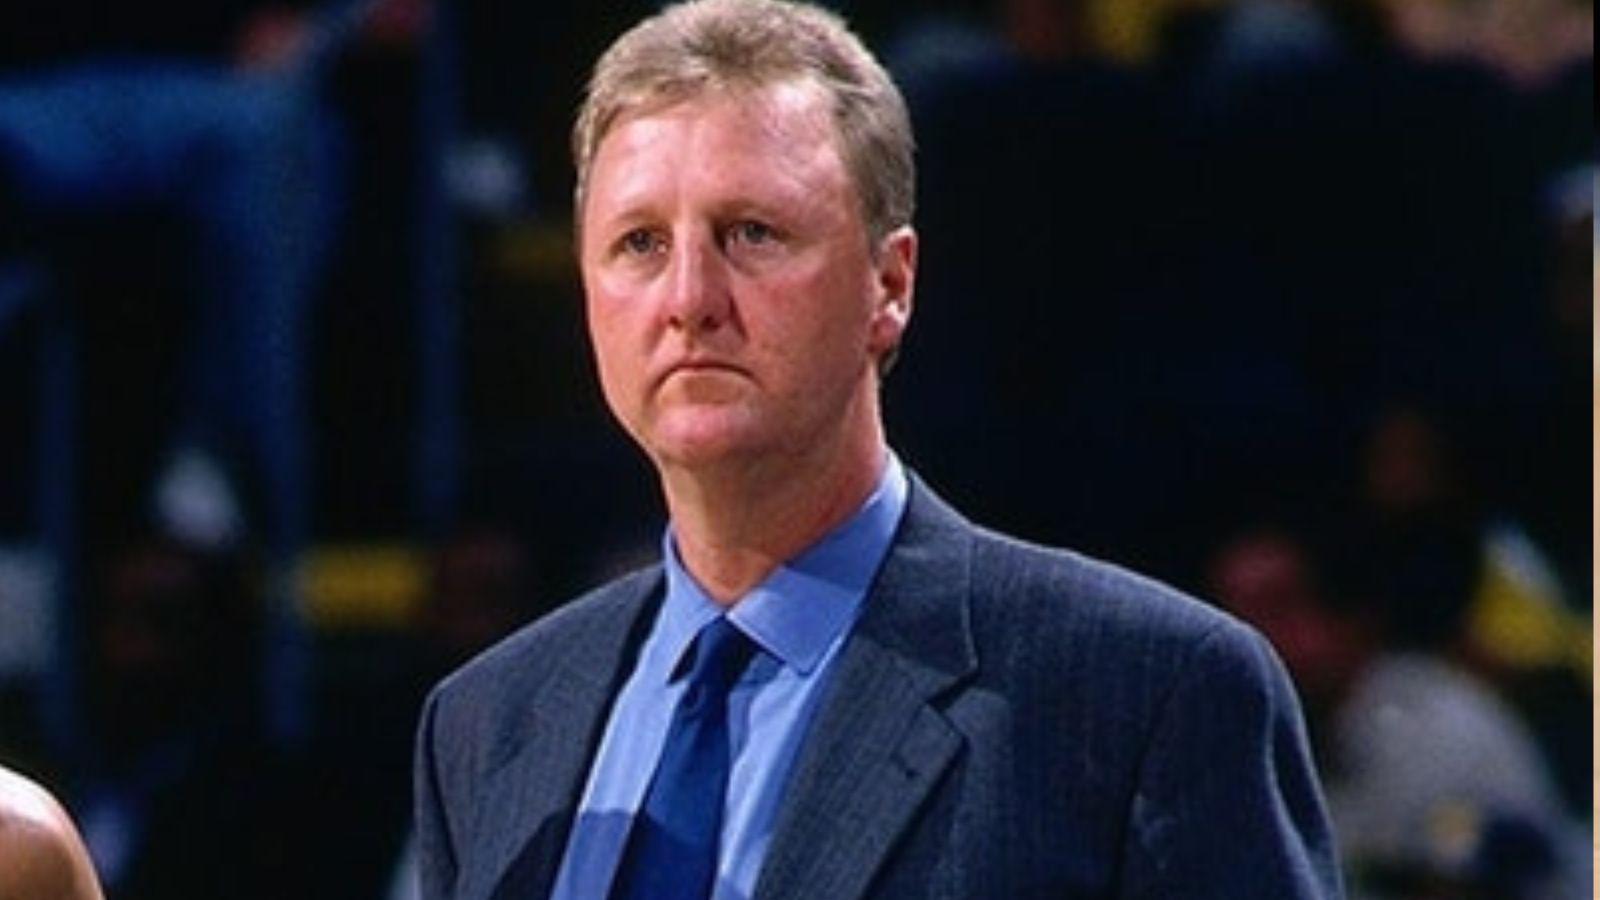 Larry Bird on the sidelines as the coach of the Indiana Pacers.